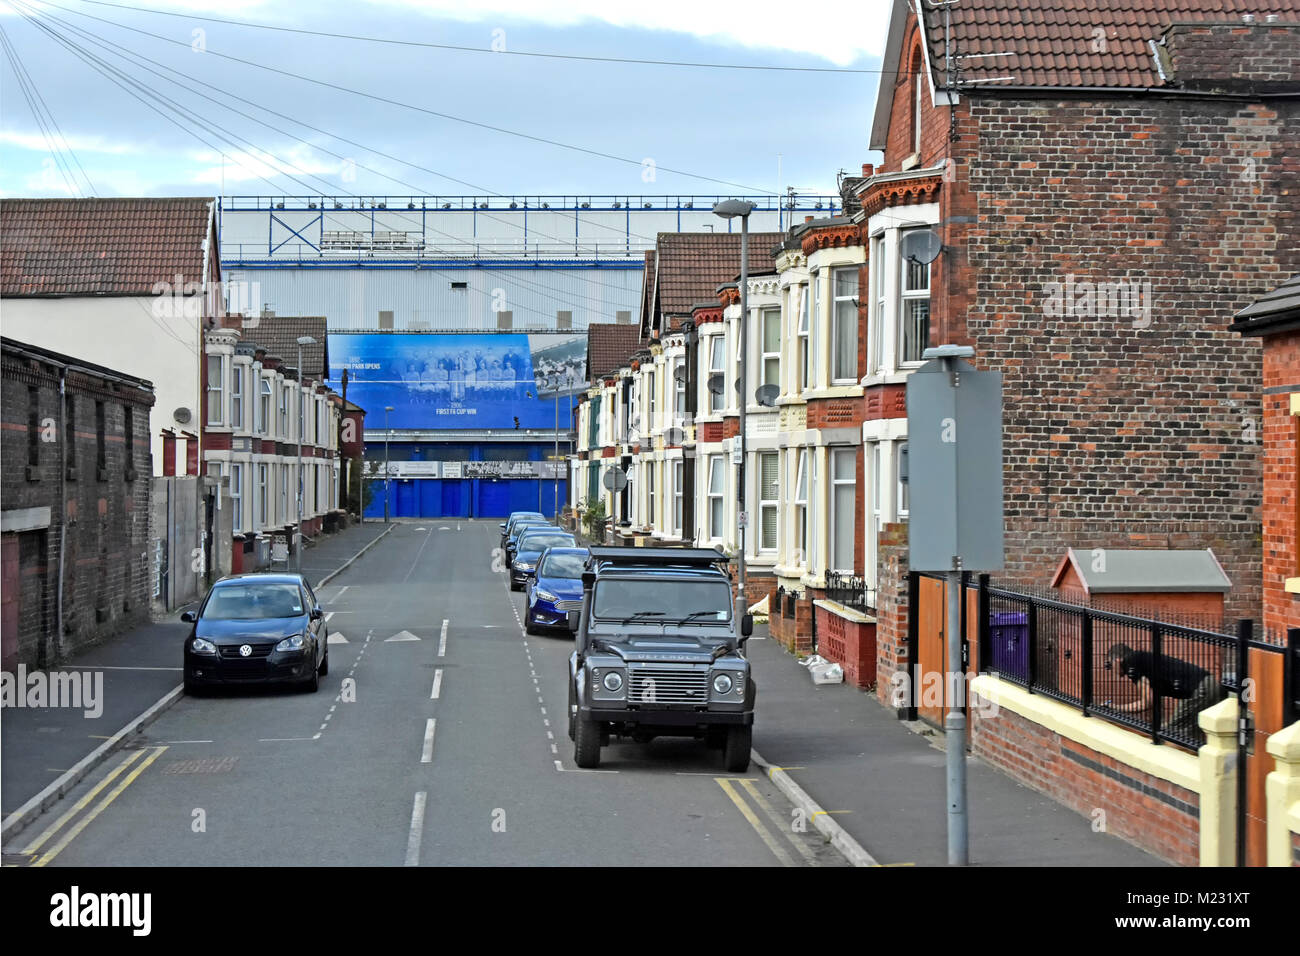 Residential Street of terraced houses with traffic calming humps & Everton football club Goodison Park stadium at end of road Liverpool England UK Stock Photo